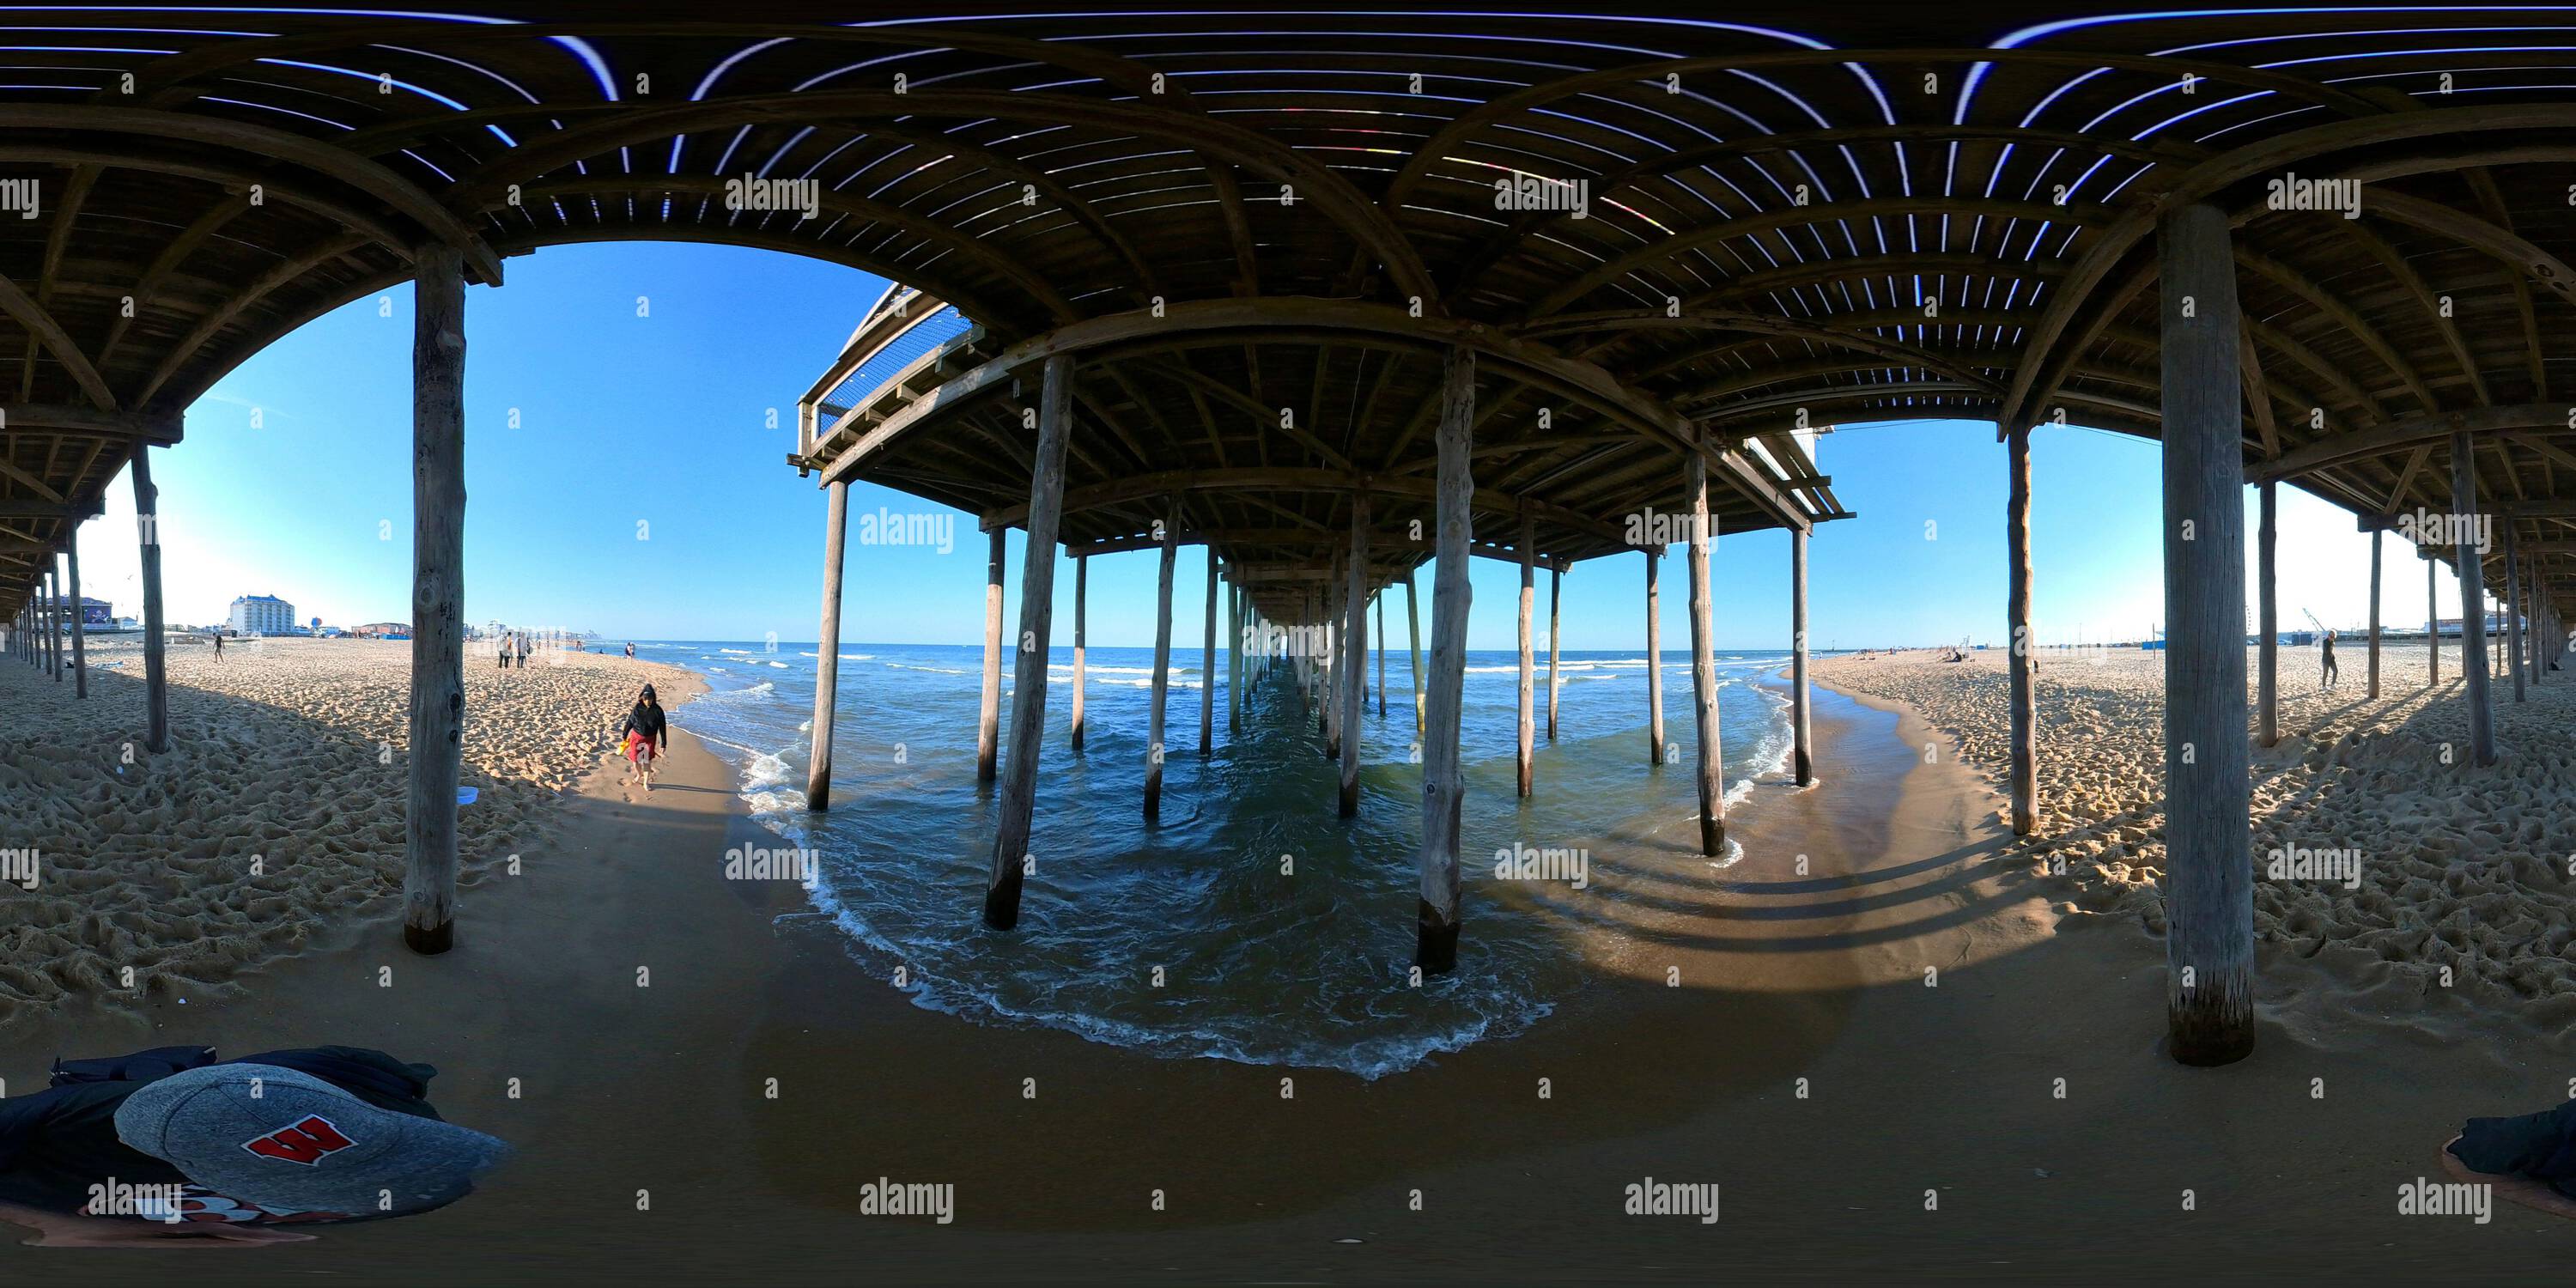 360 degree panoramic view of Under the pier in Ocean City, Maryland